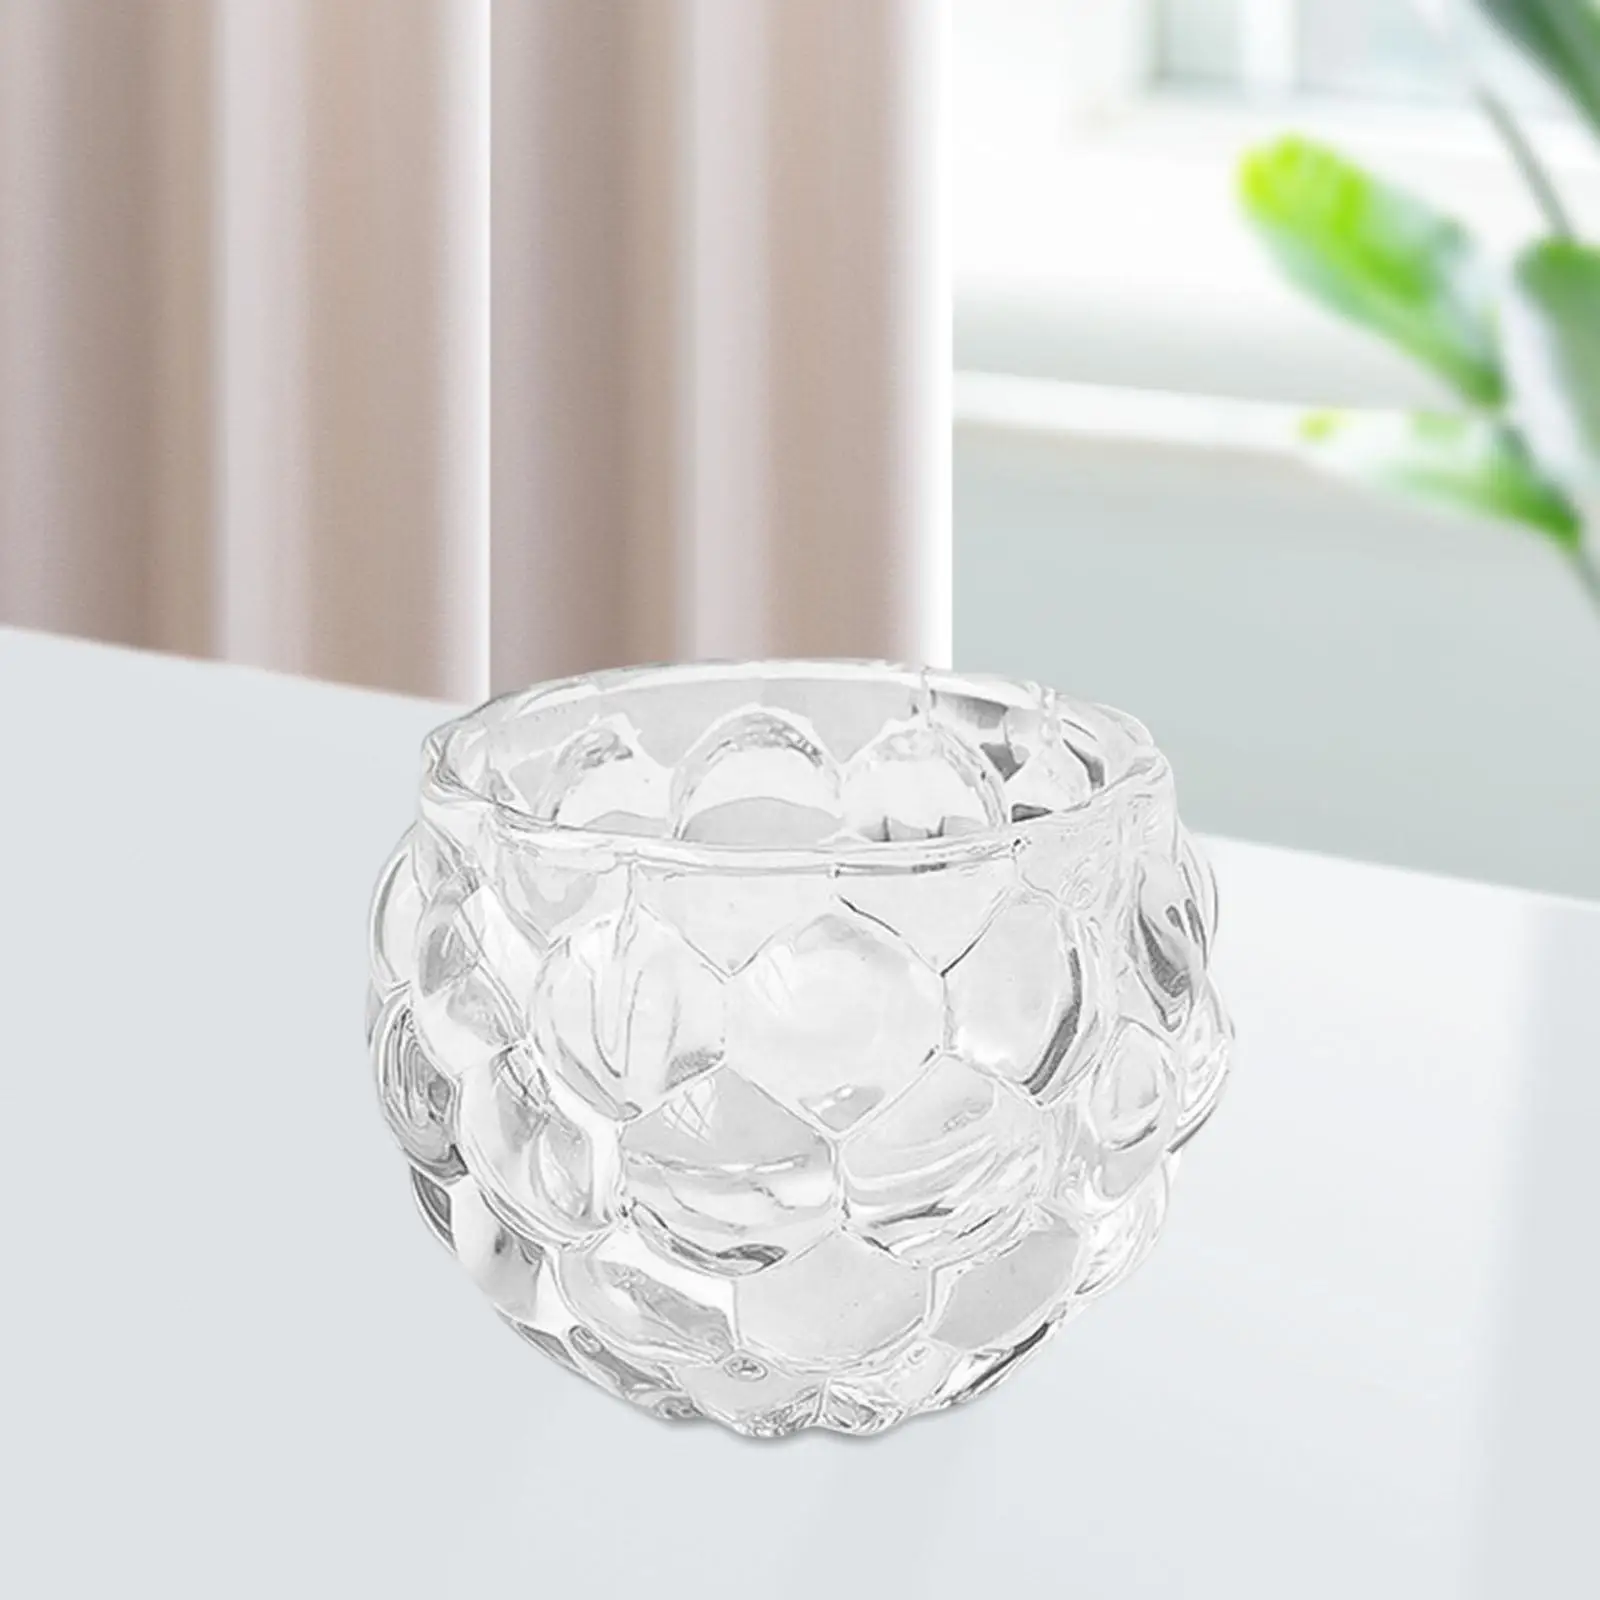 Transparent Glass Tealight Candle Holder for Restaurants Offices Coffee Shop